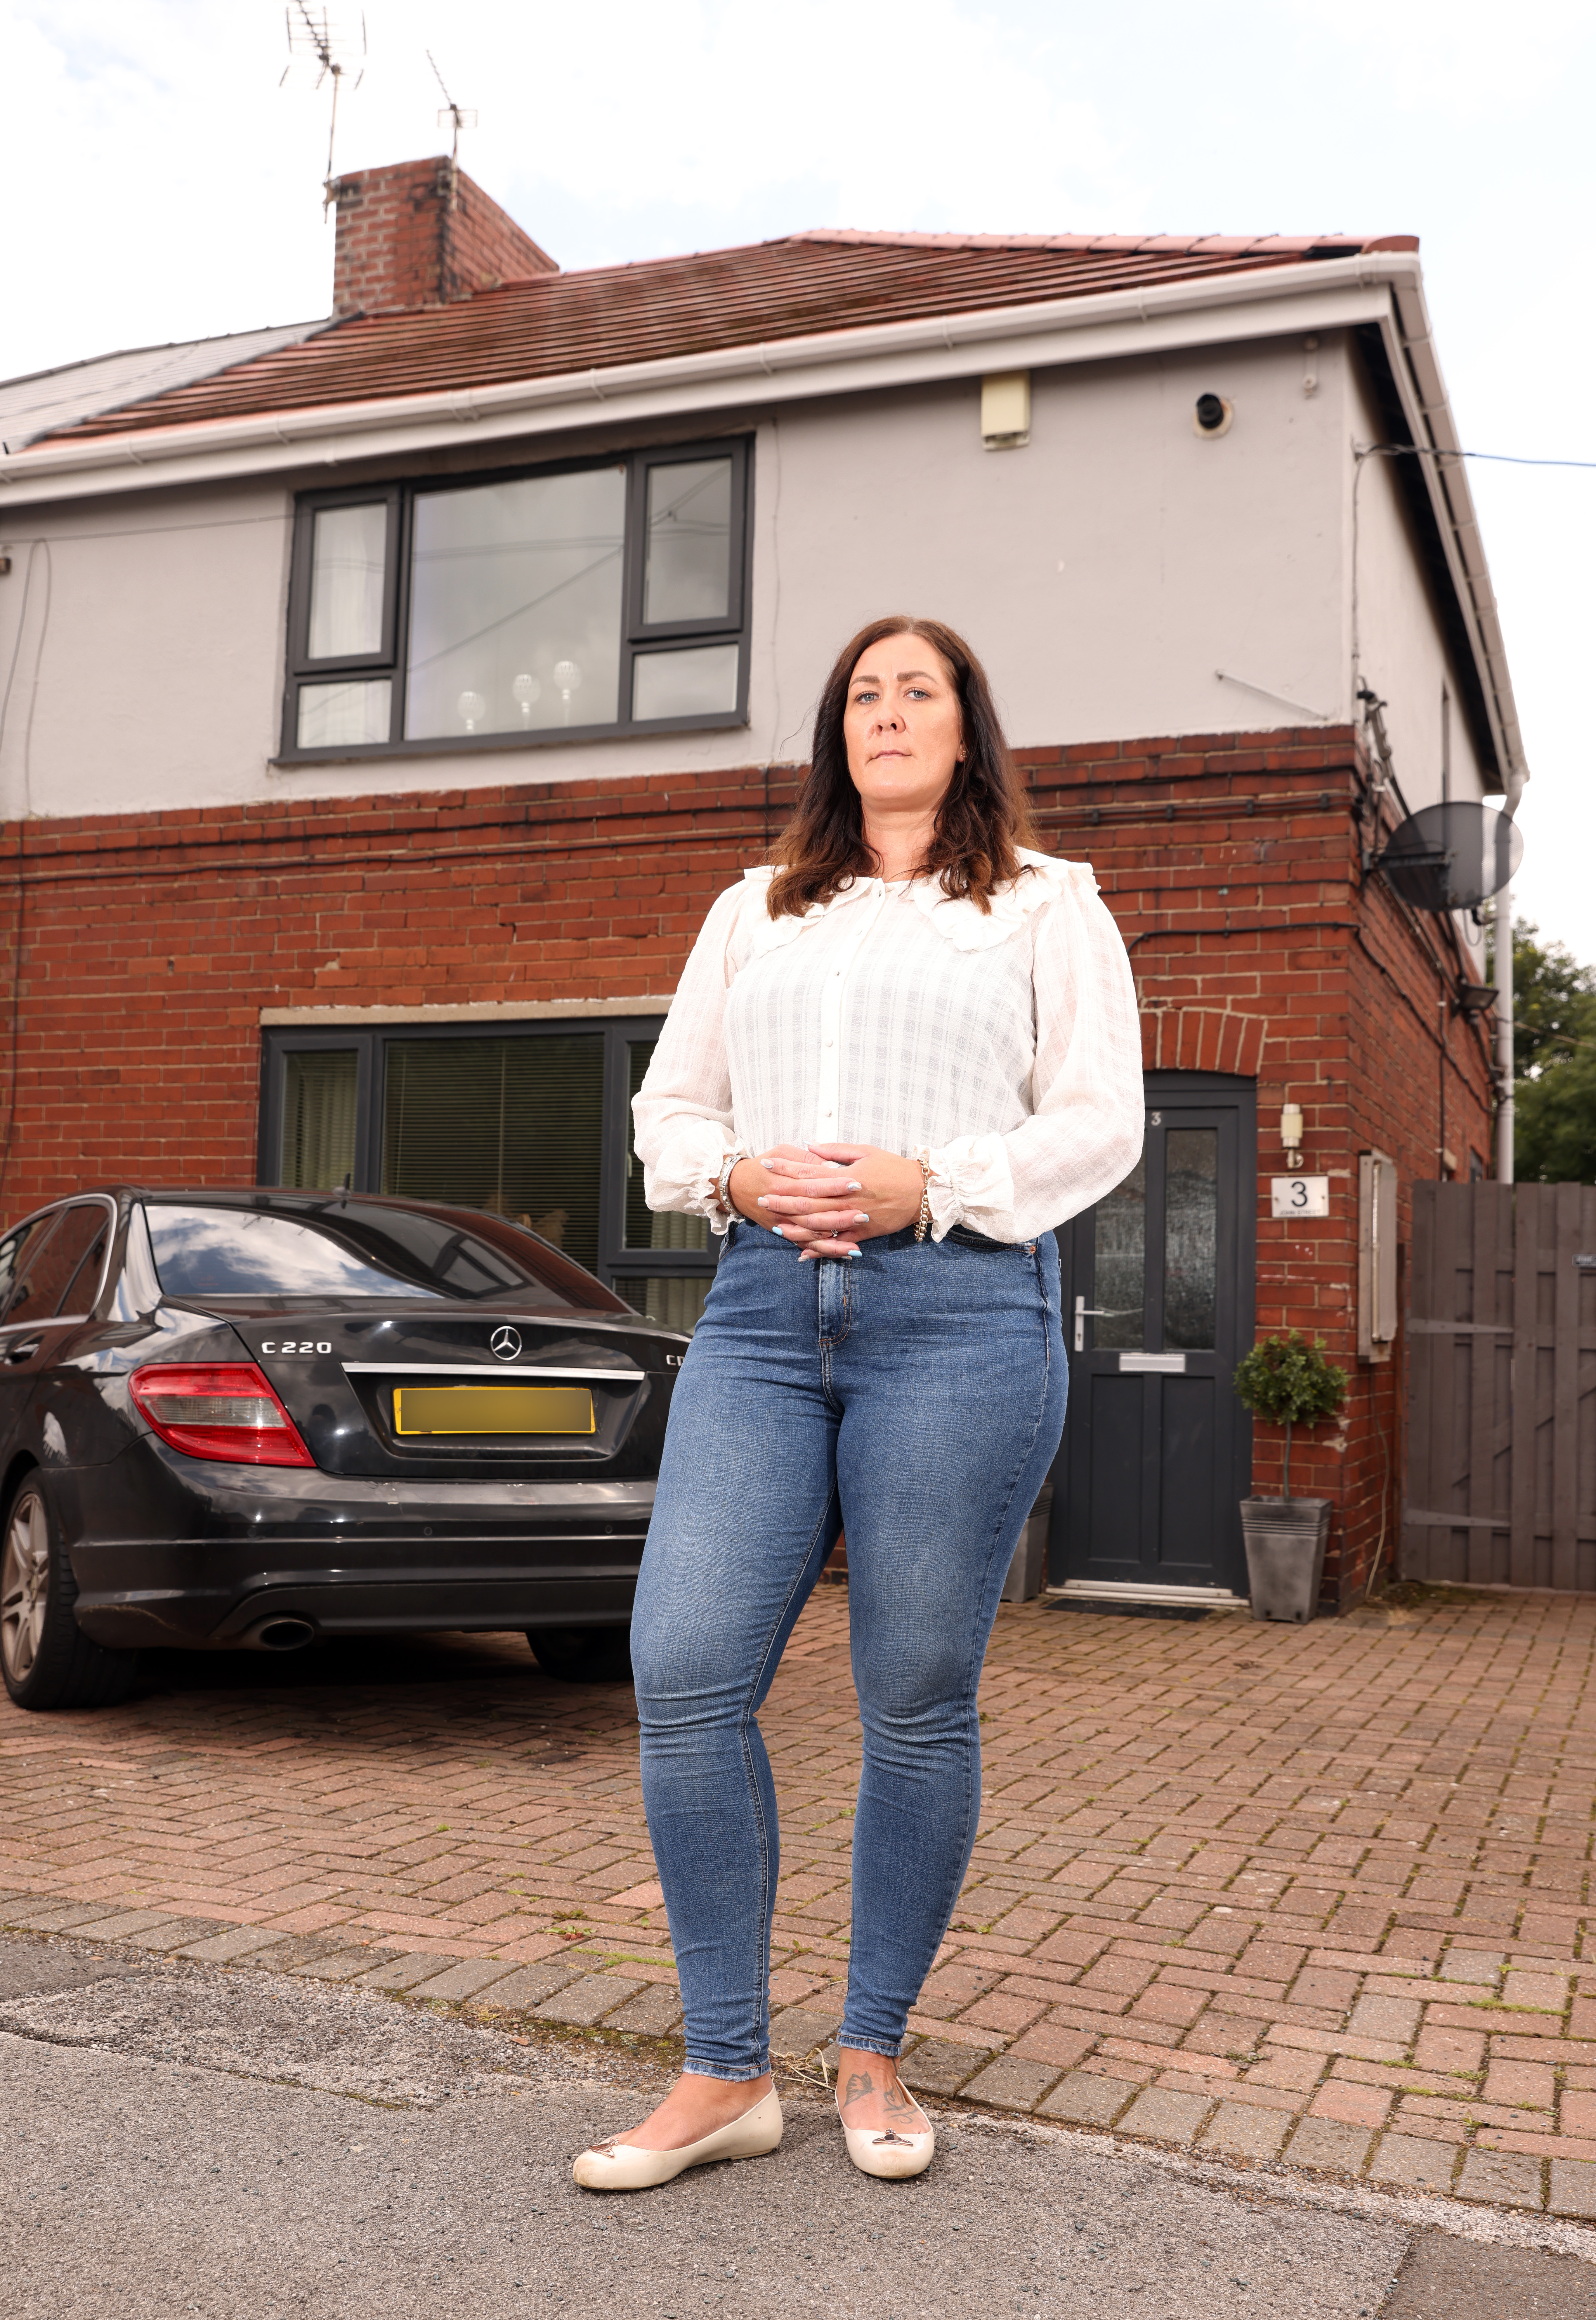 Mum Jemima has already seen her mortgage nearly treble from £172 to £486 per month